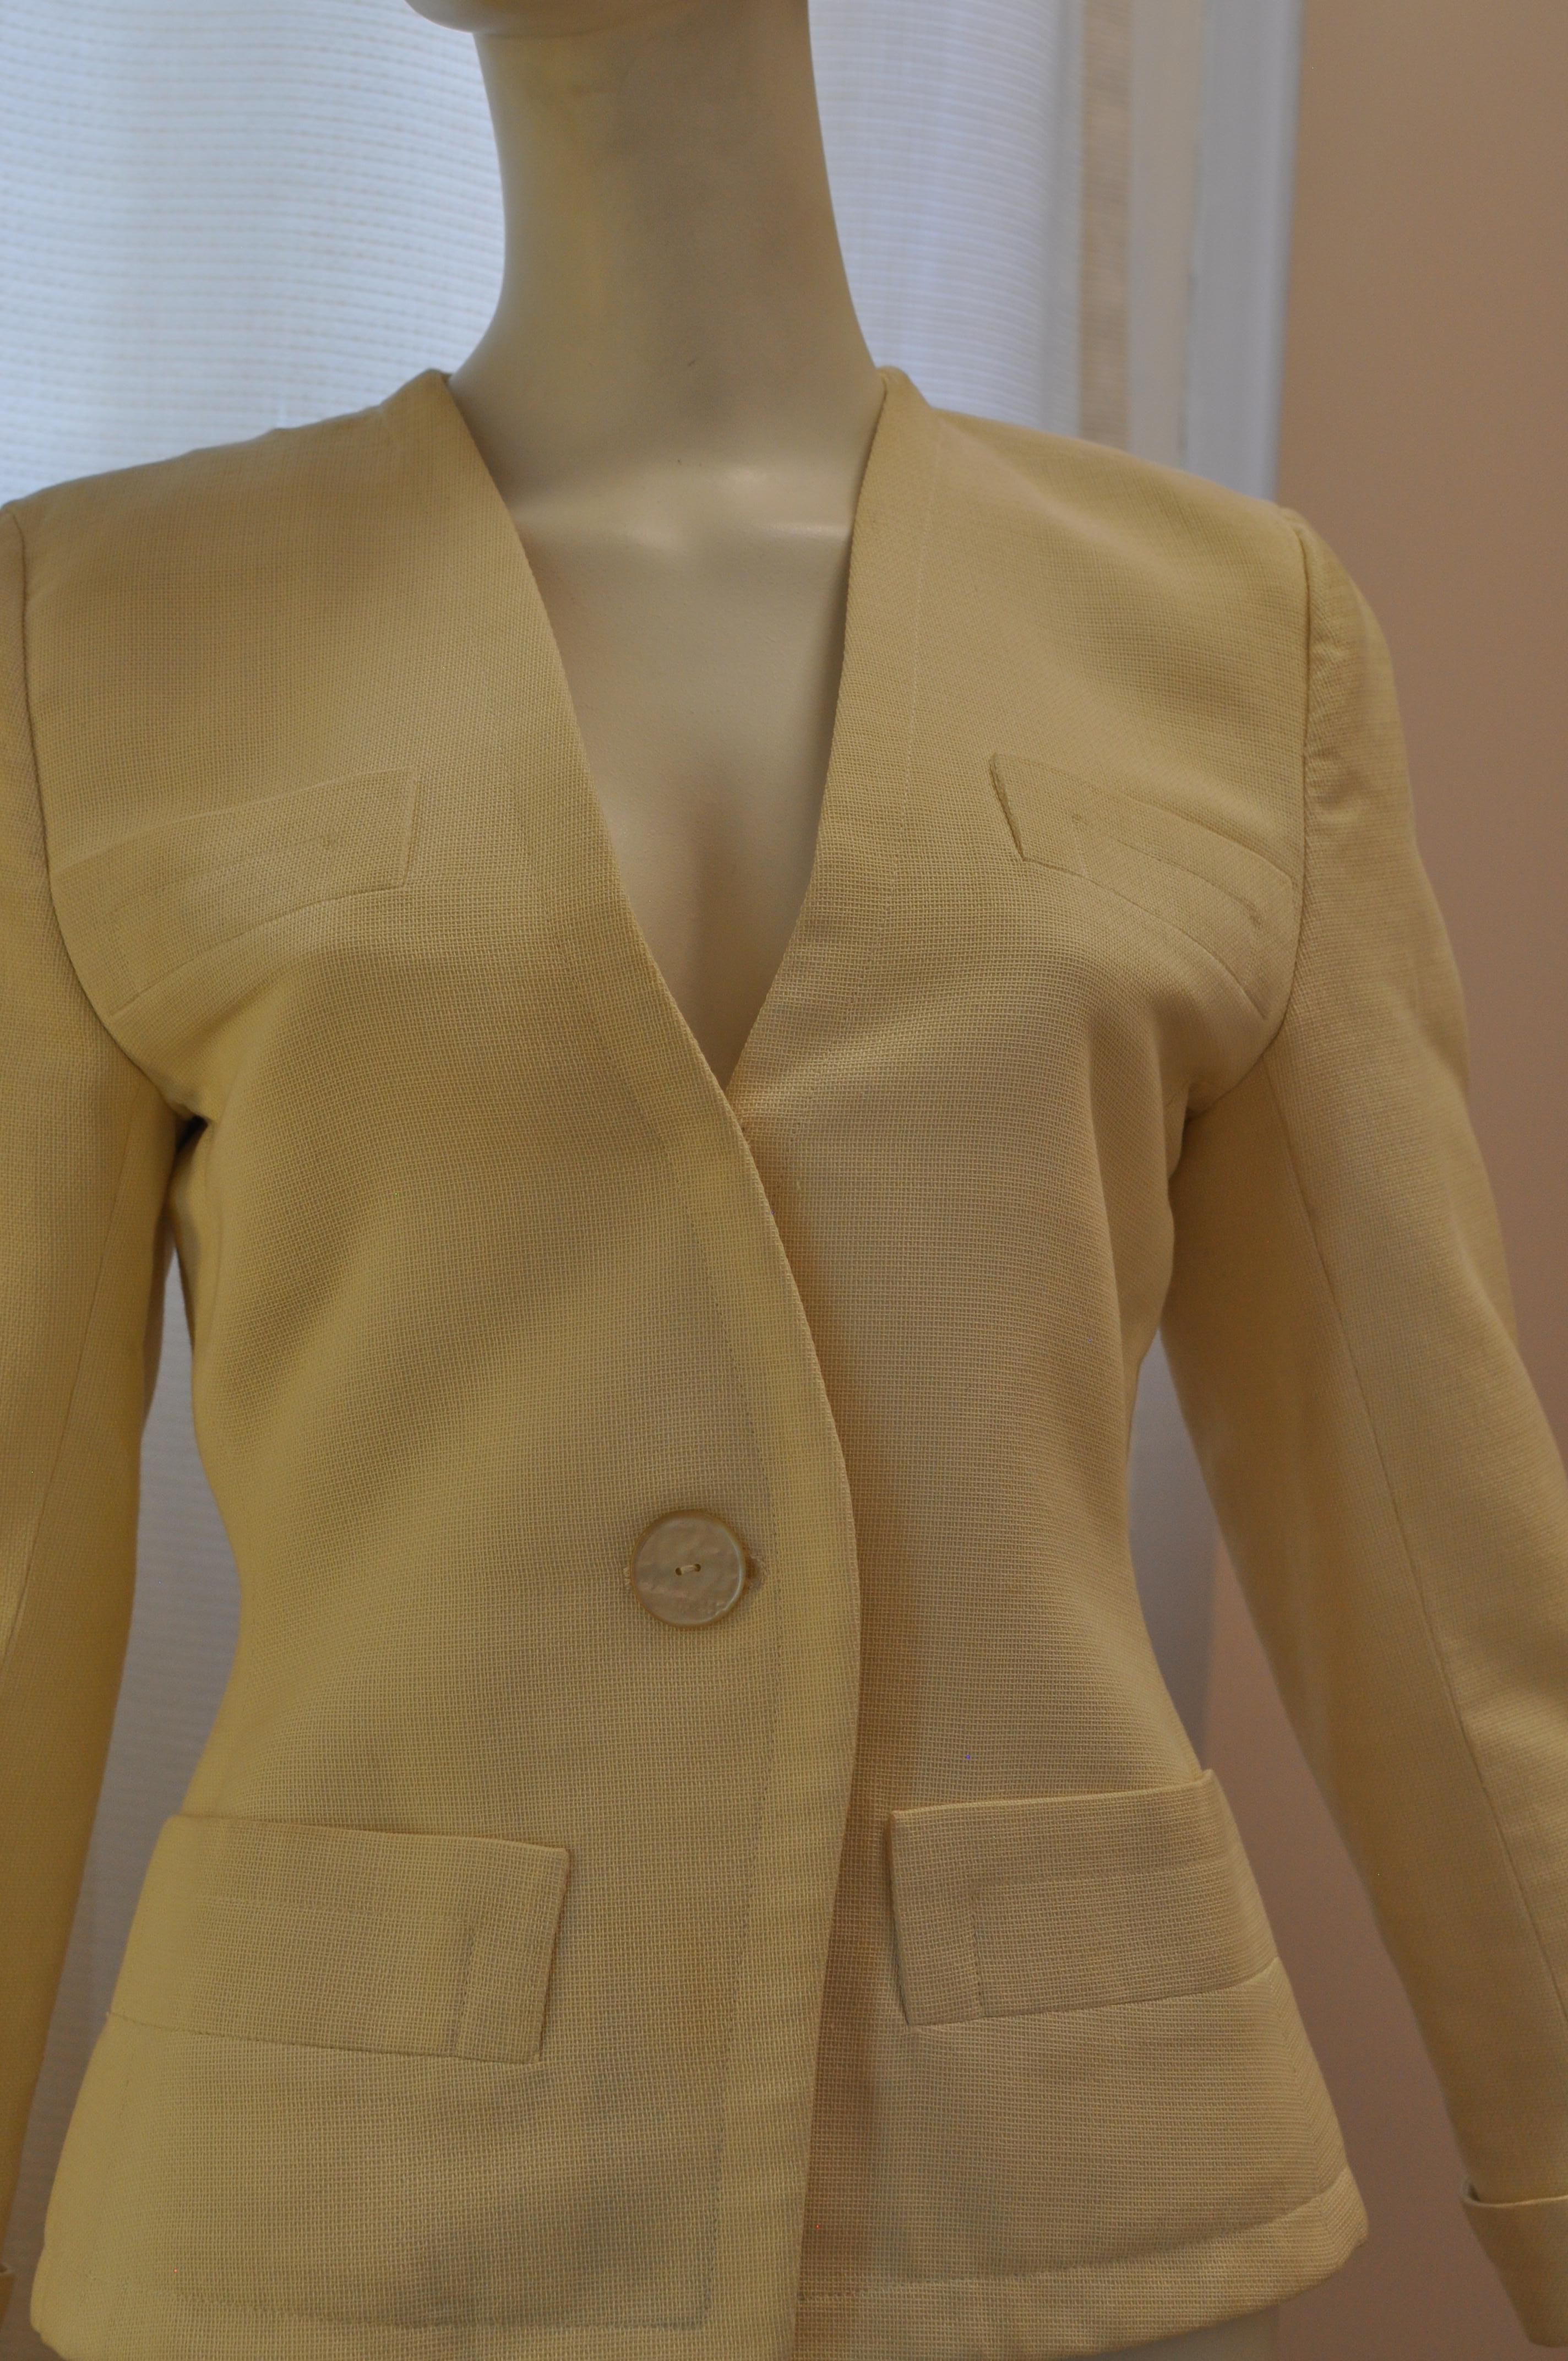 The care tag is missing but I believe a heavy cotton close weave material was used.  The off white v-neck jacket has four usable slash pockets: two at the  bust and two at the hips. The cuffs are turn up and there is a one button closure.

I will be